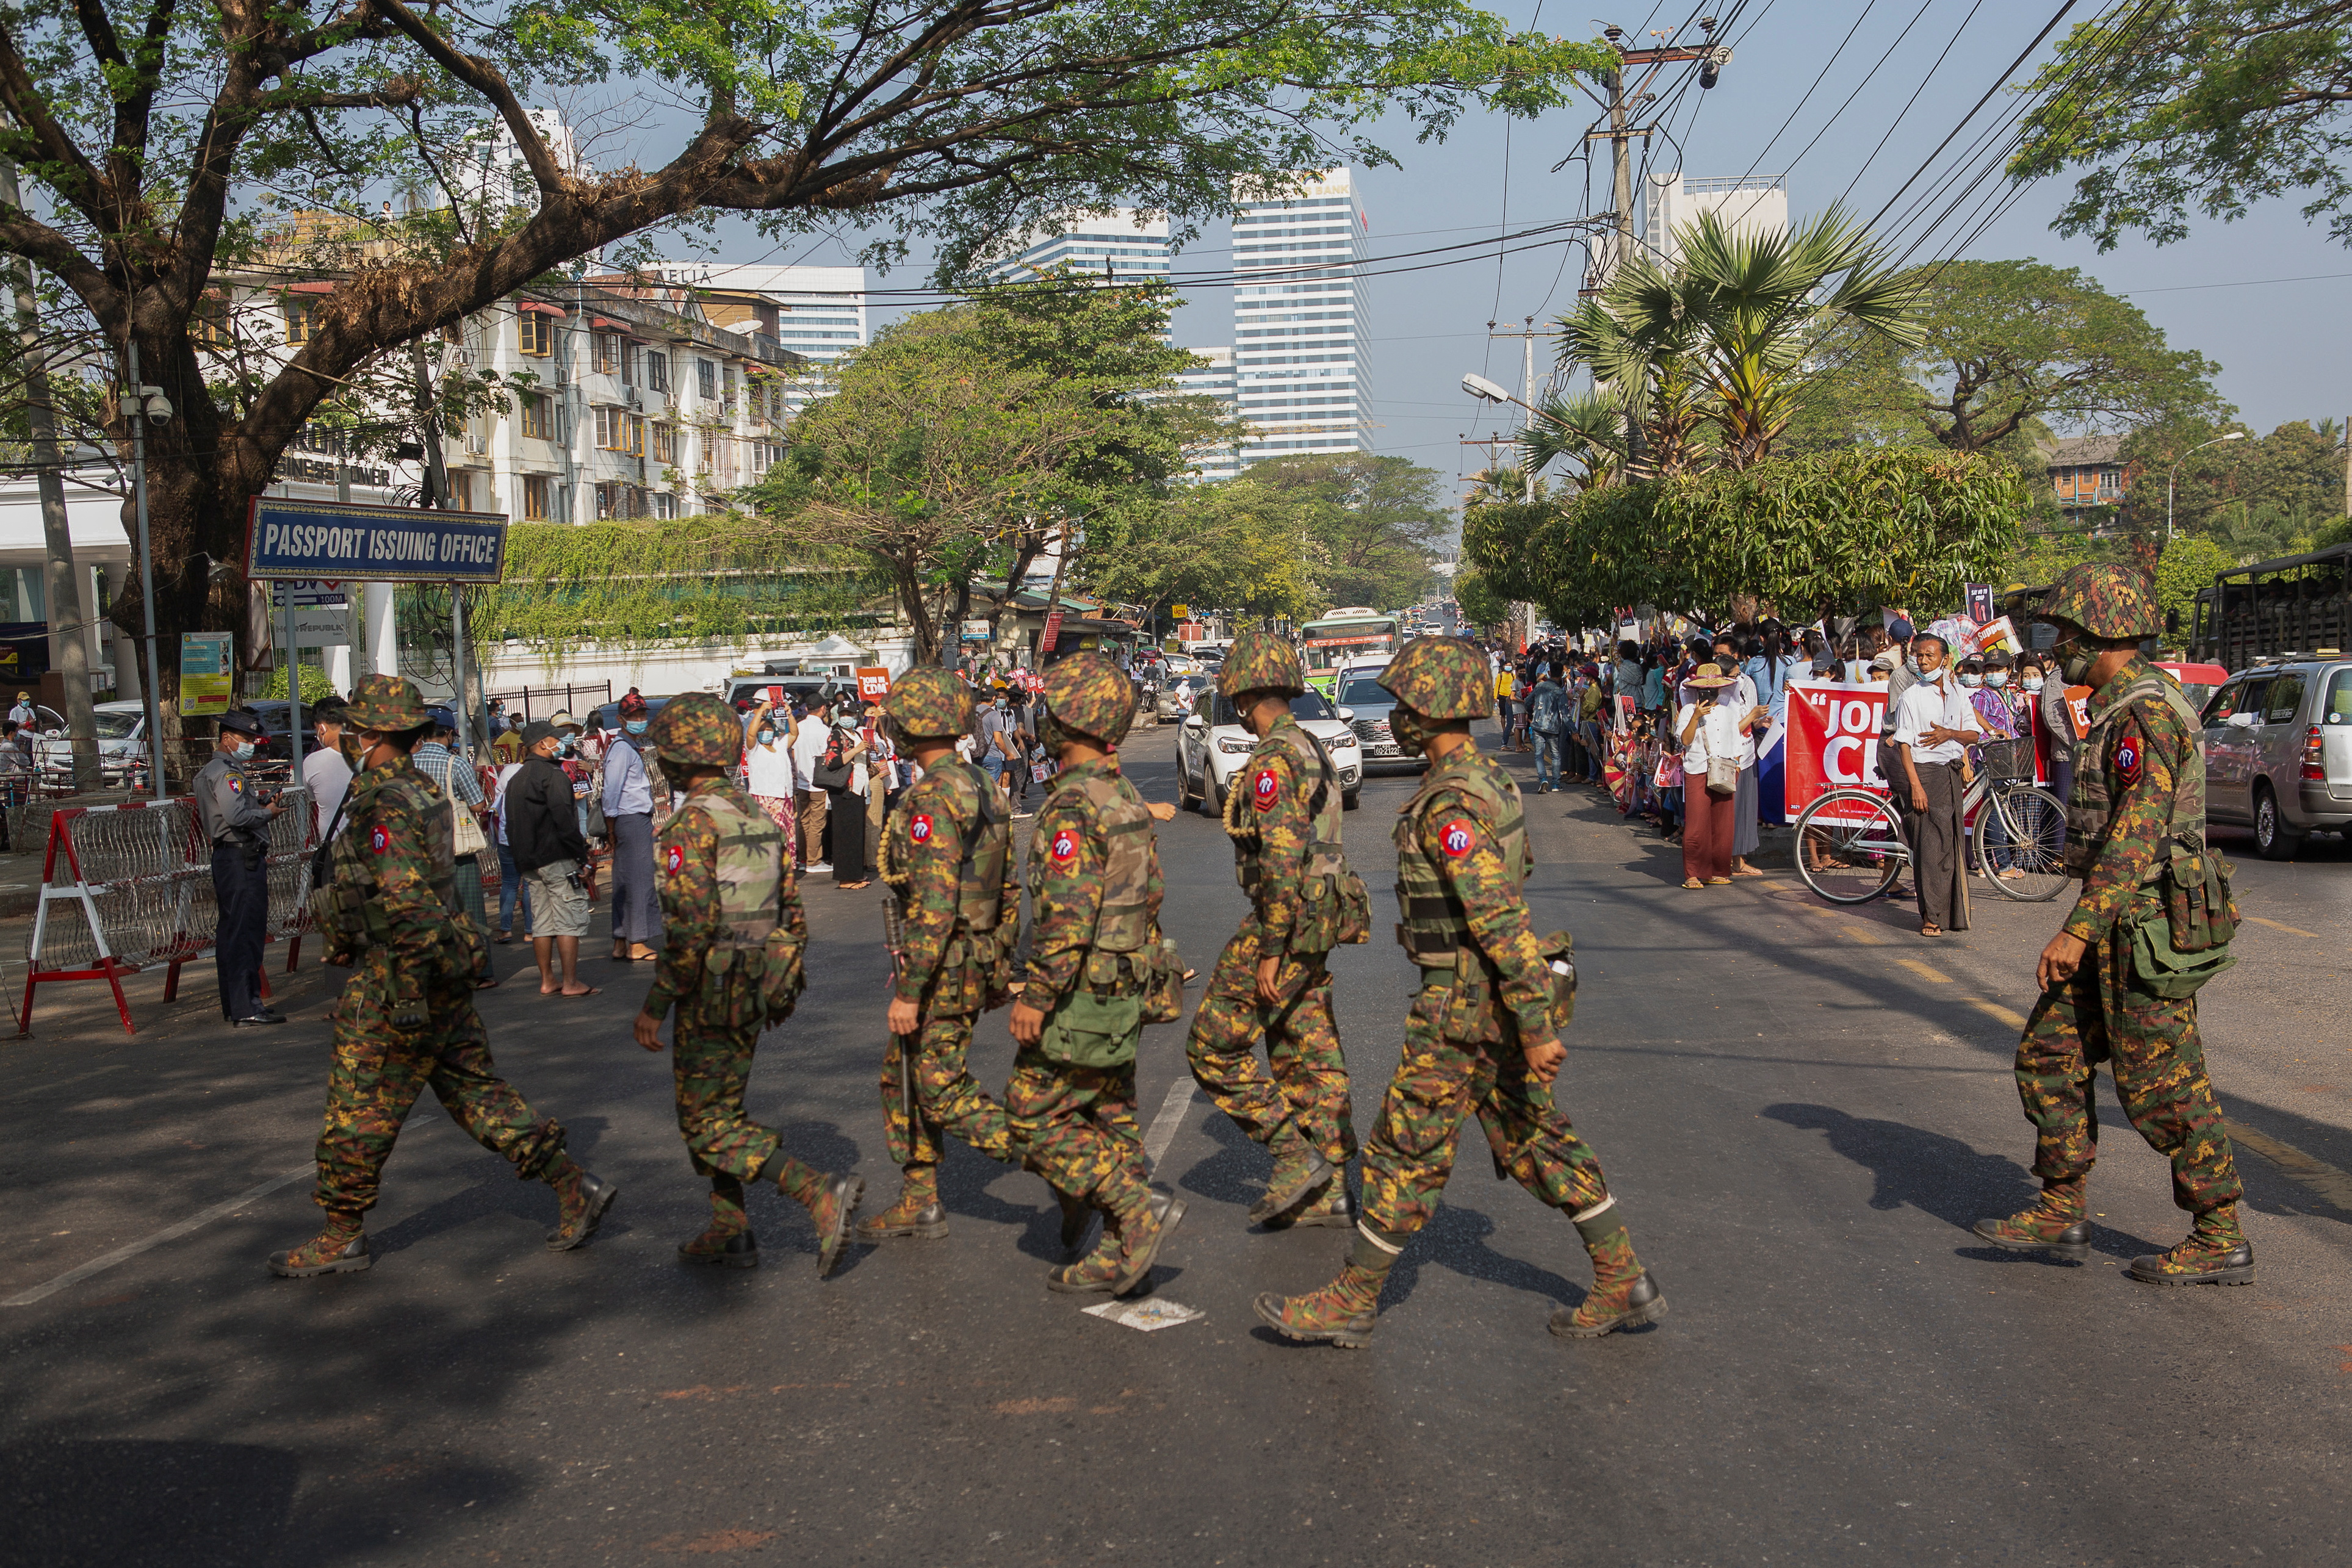 Soldiers cross a street as people gather to protest against the military coup, in Yangon